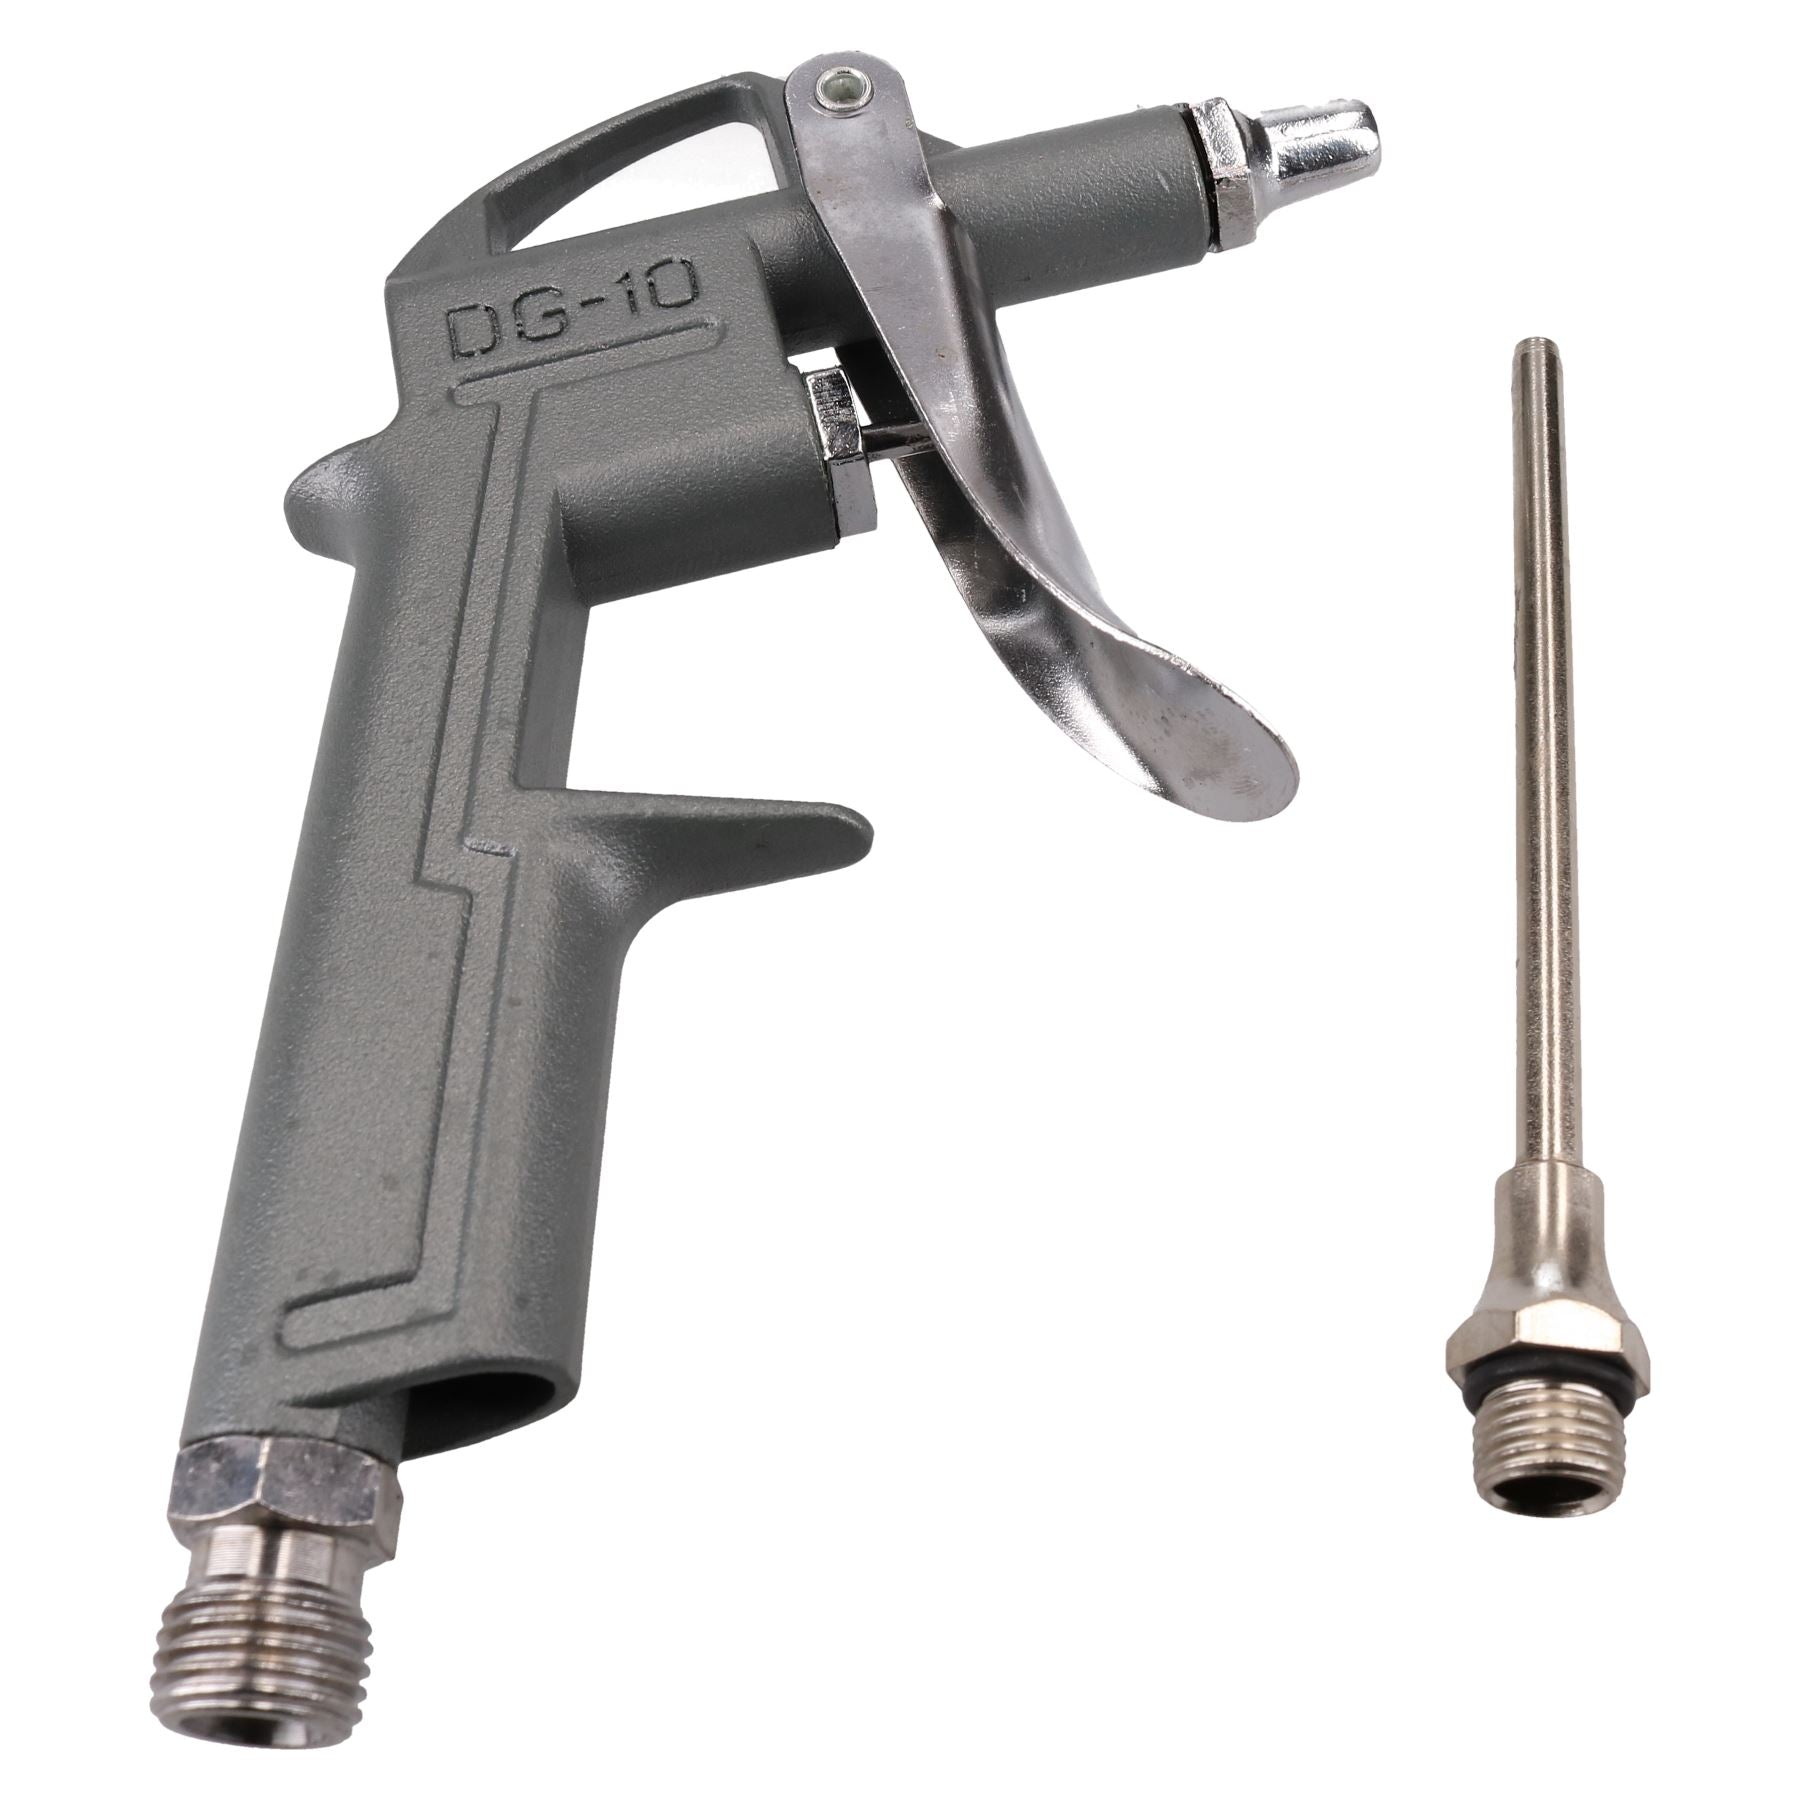 Air Dust Duster Blow Gun Blowing Remover Removal Tool 2pc Kit Long Nozzle